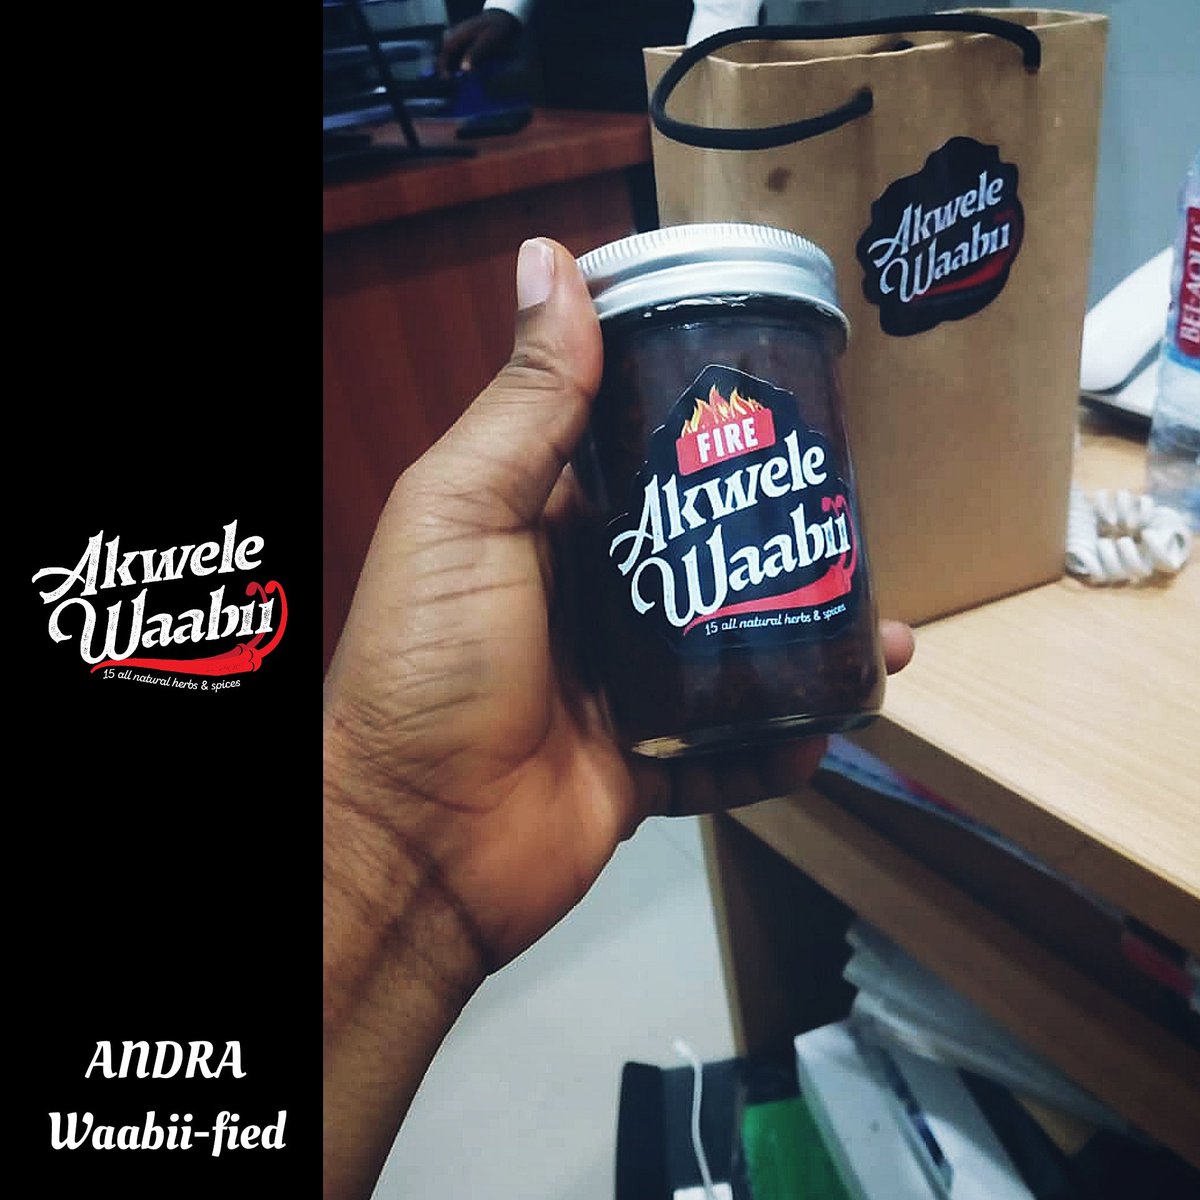 🌶 Our clients are special to us
🌶 We love it even more when they get 'Waabii-fied.'

#akwelewaabii #akwelewaabiishito #shito #startup #clientsatisfaction #madeinghana🇬🇭 #foodsinghana #ghanaeats🇬🇭